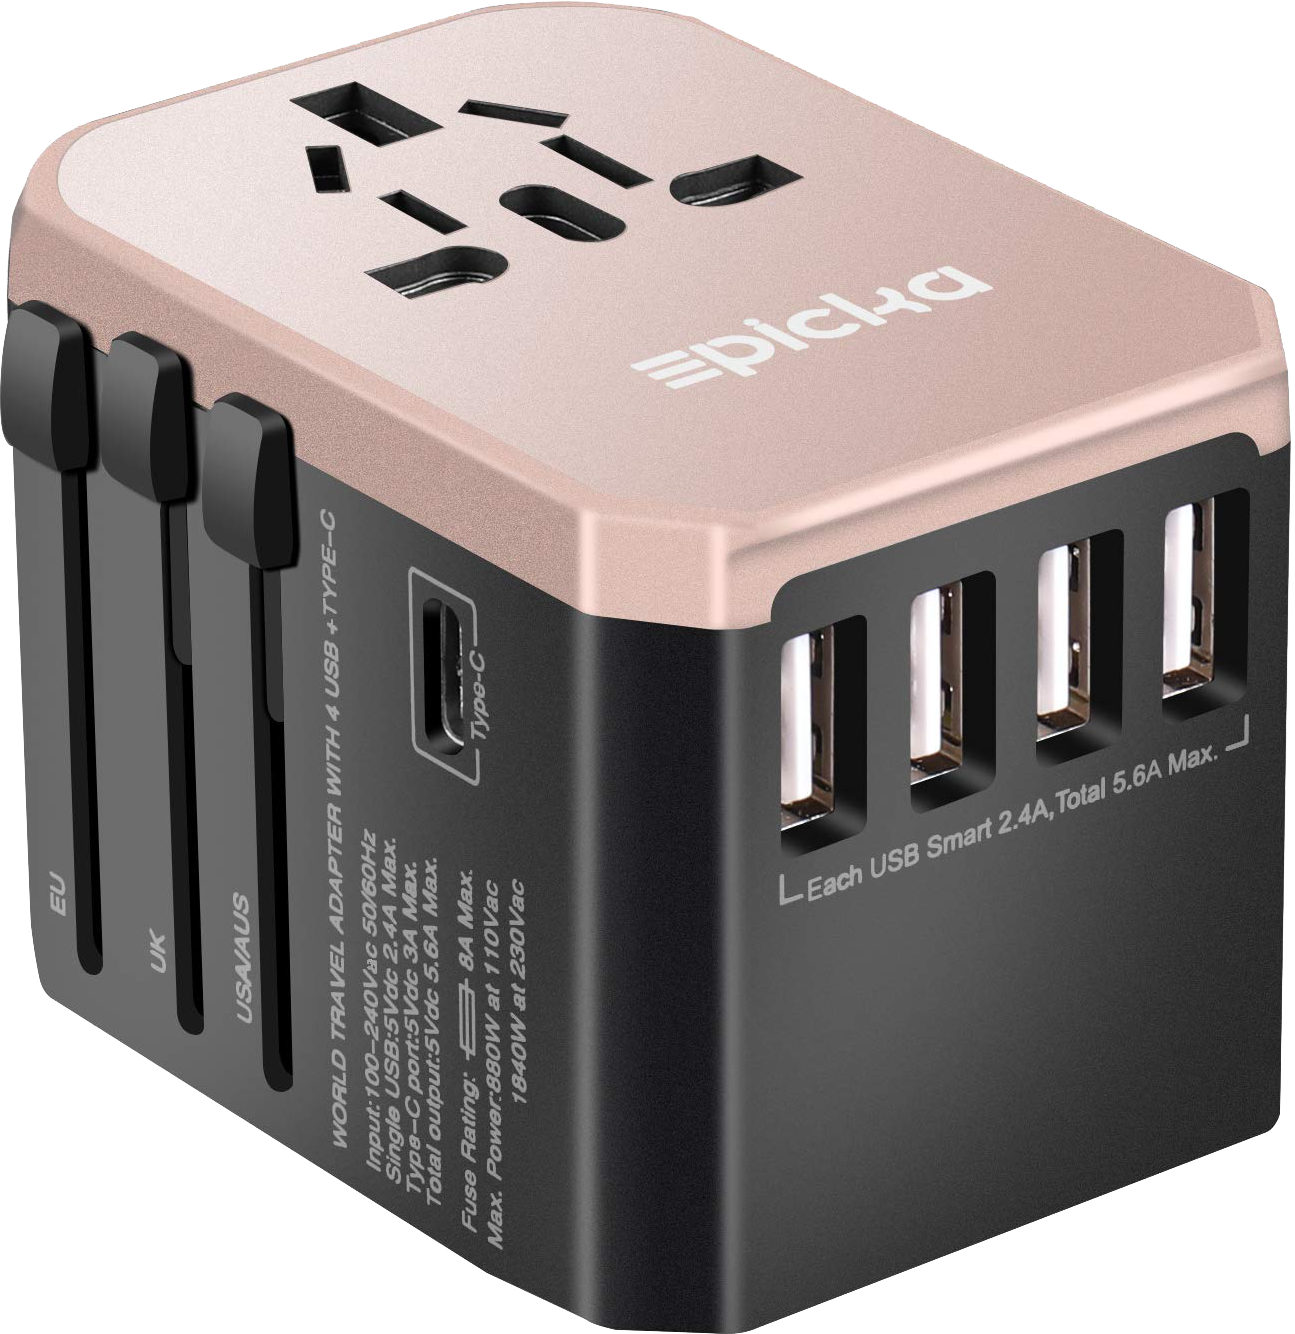  Universal Travel Power Adapter - EPICKA All in One Worldwide Wall Charger AC Plug Adaptor